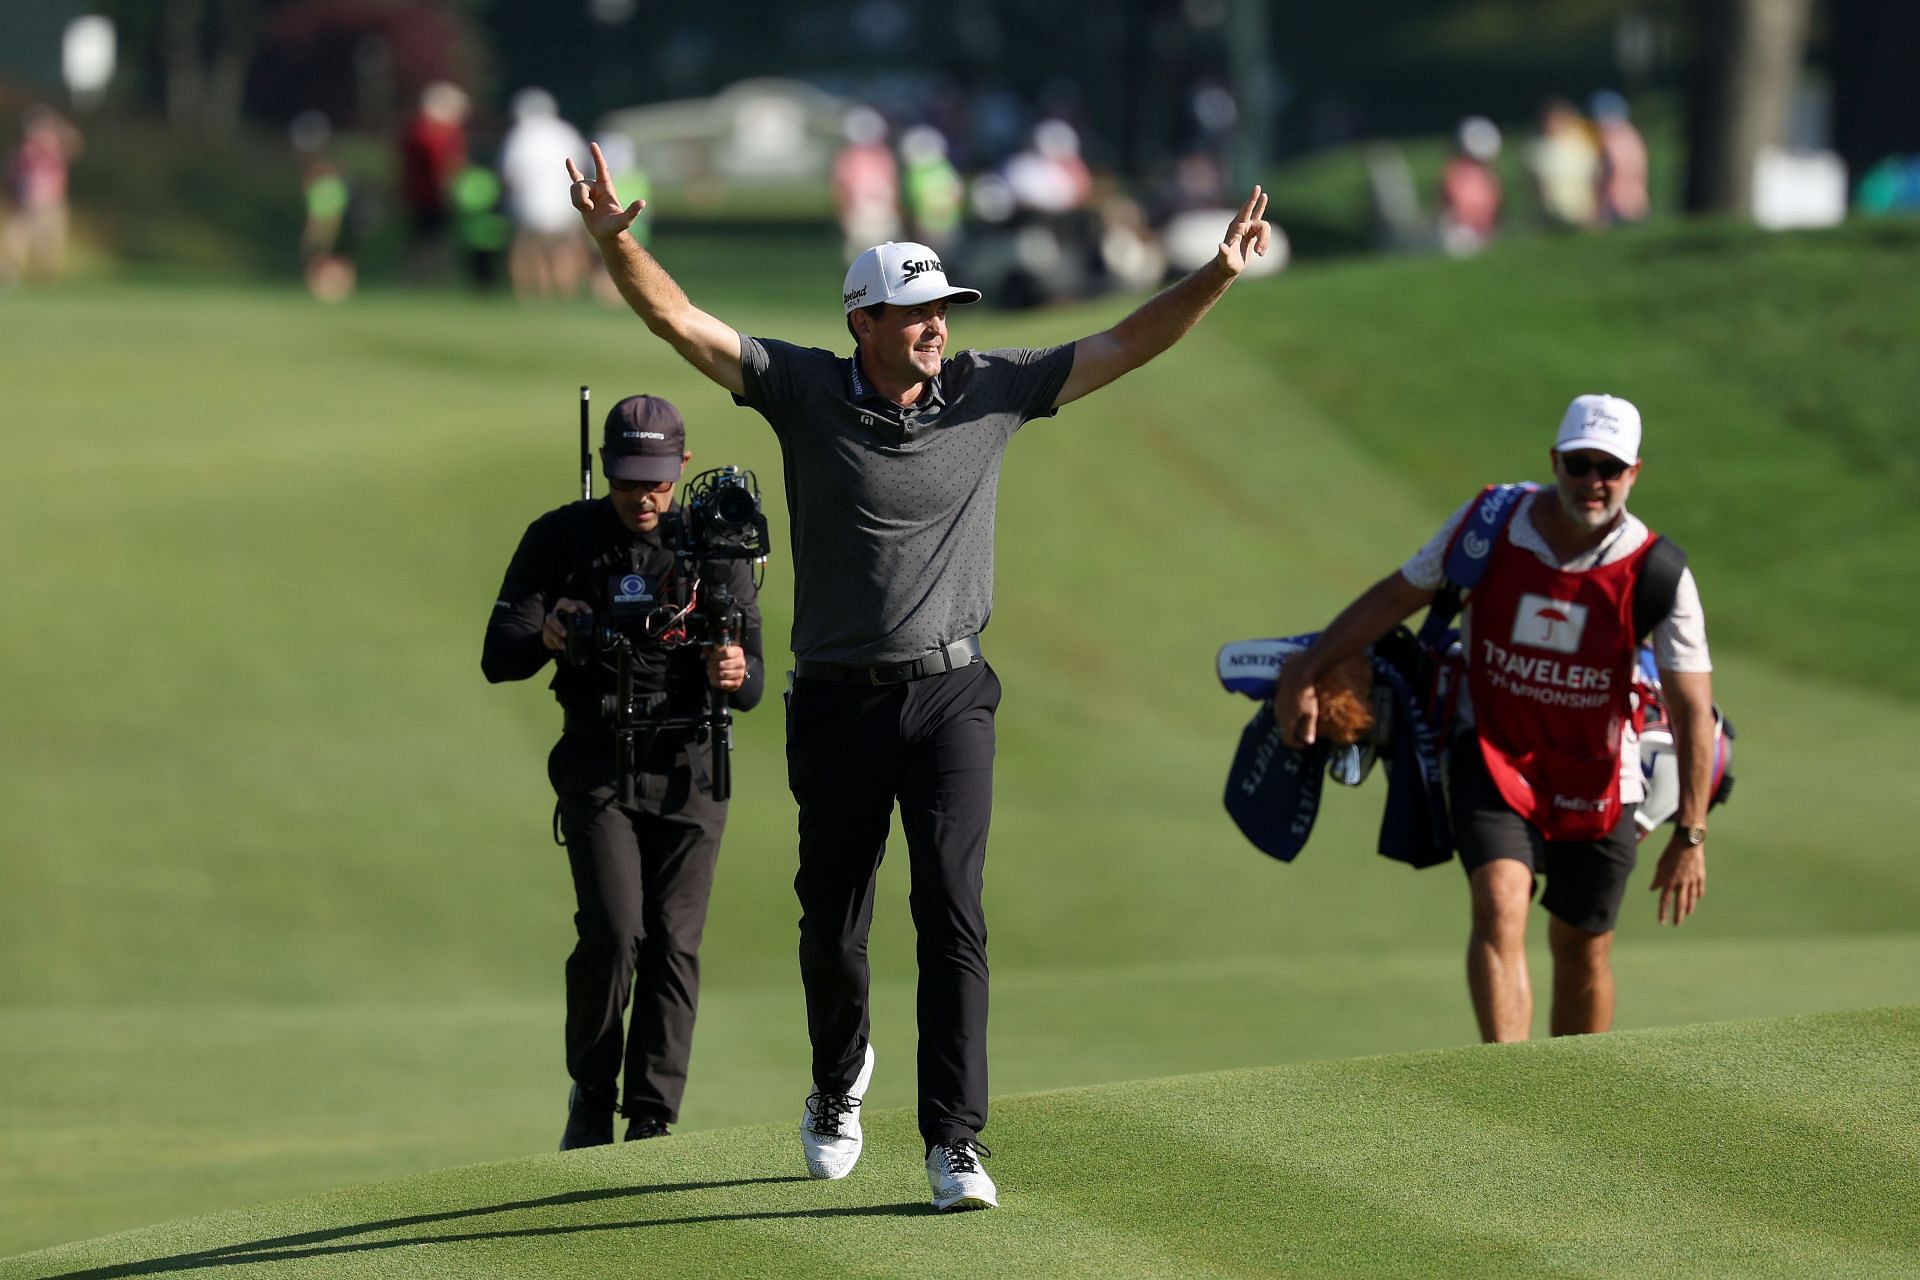 Travelers Championship leaderboard, payouts and takeaways